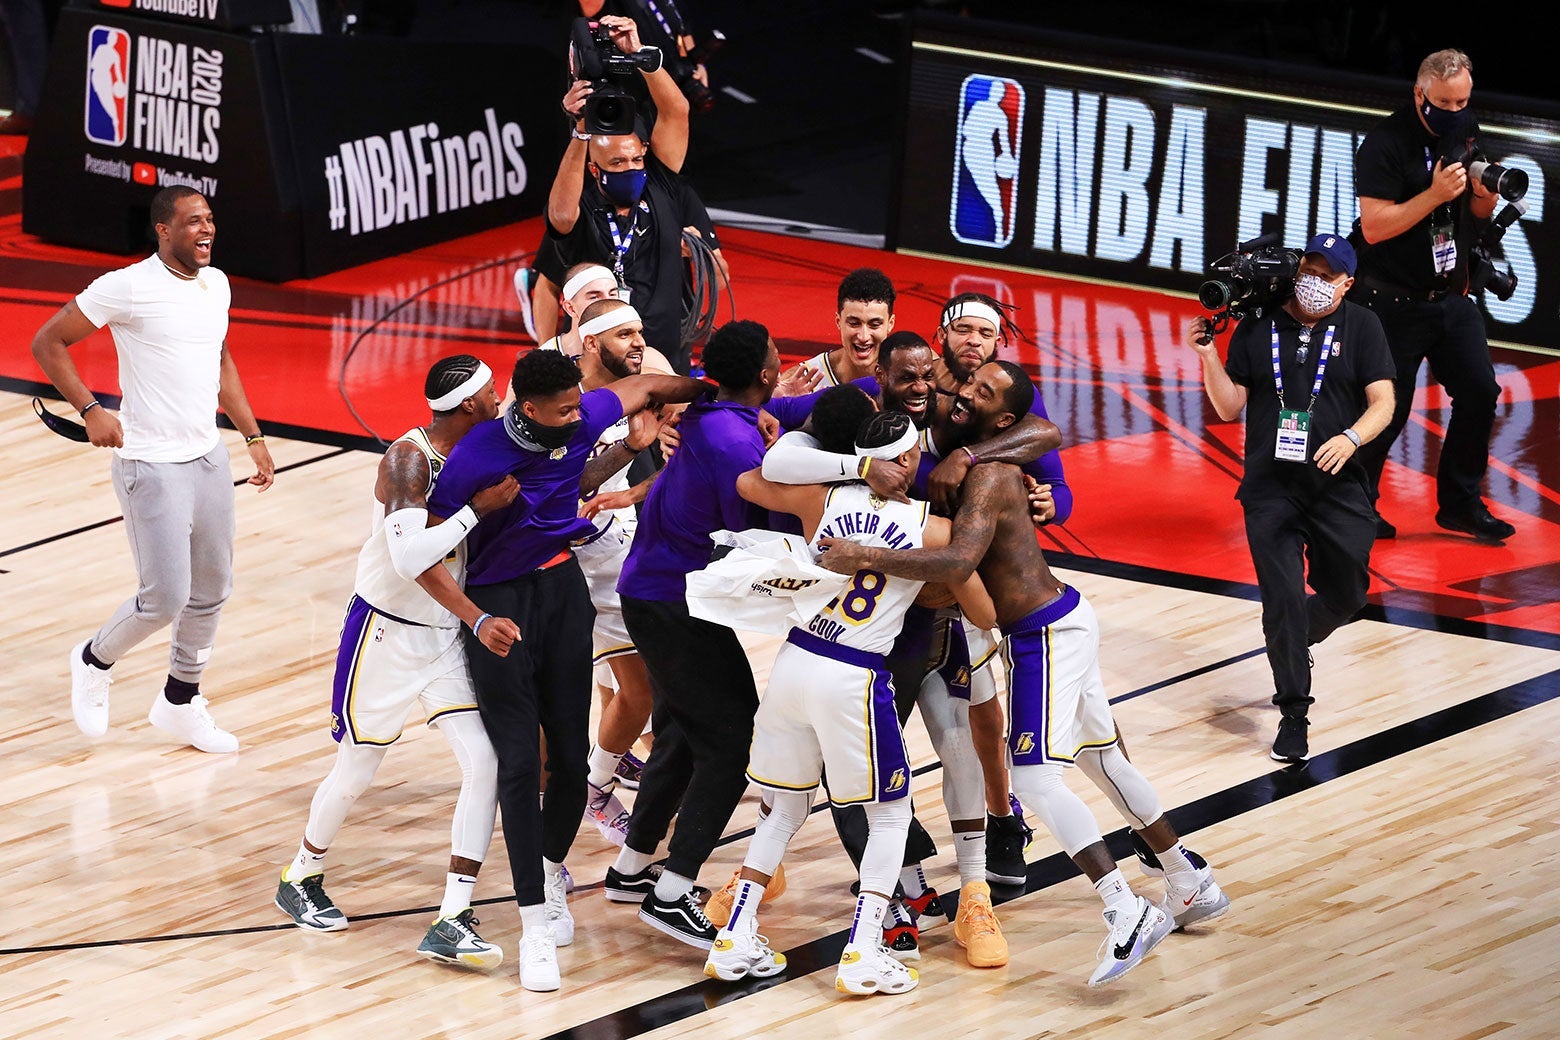 The Lakers hug one another on a gym floor.